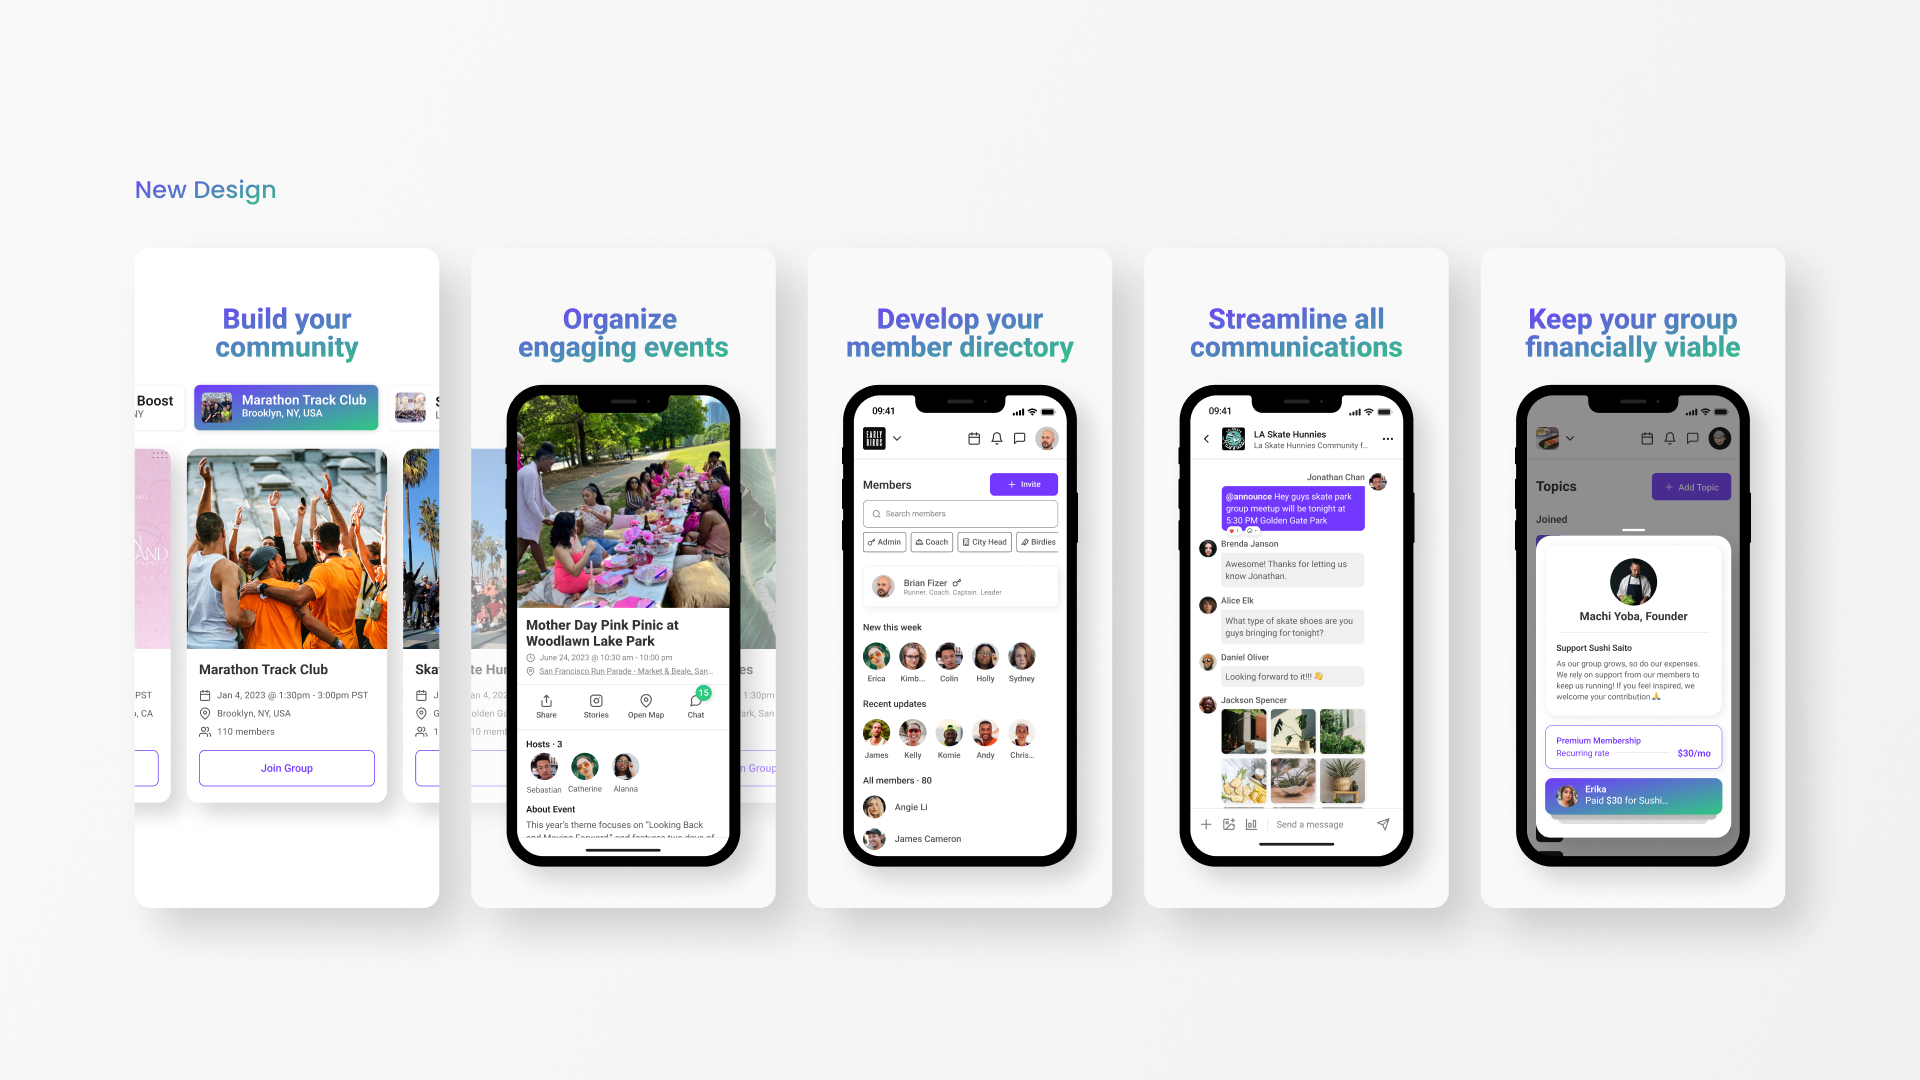 Heylo's new app store screenshot designs due to the revamp of the design system.